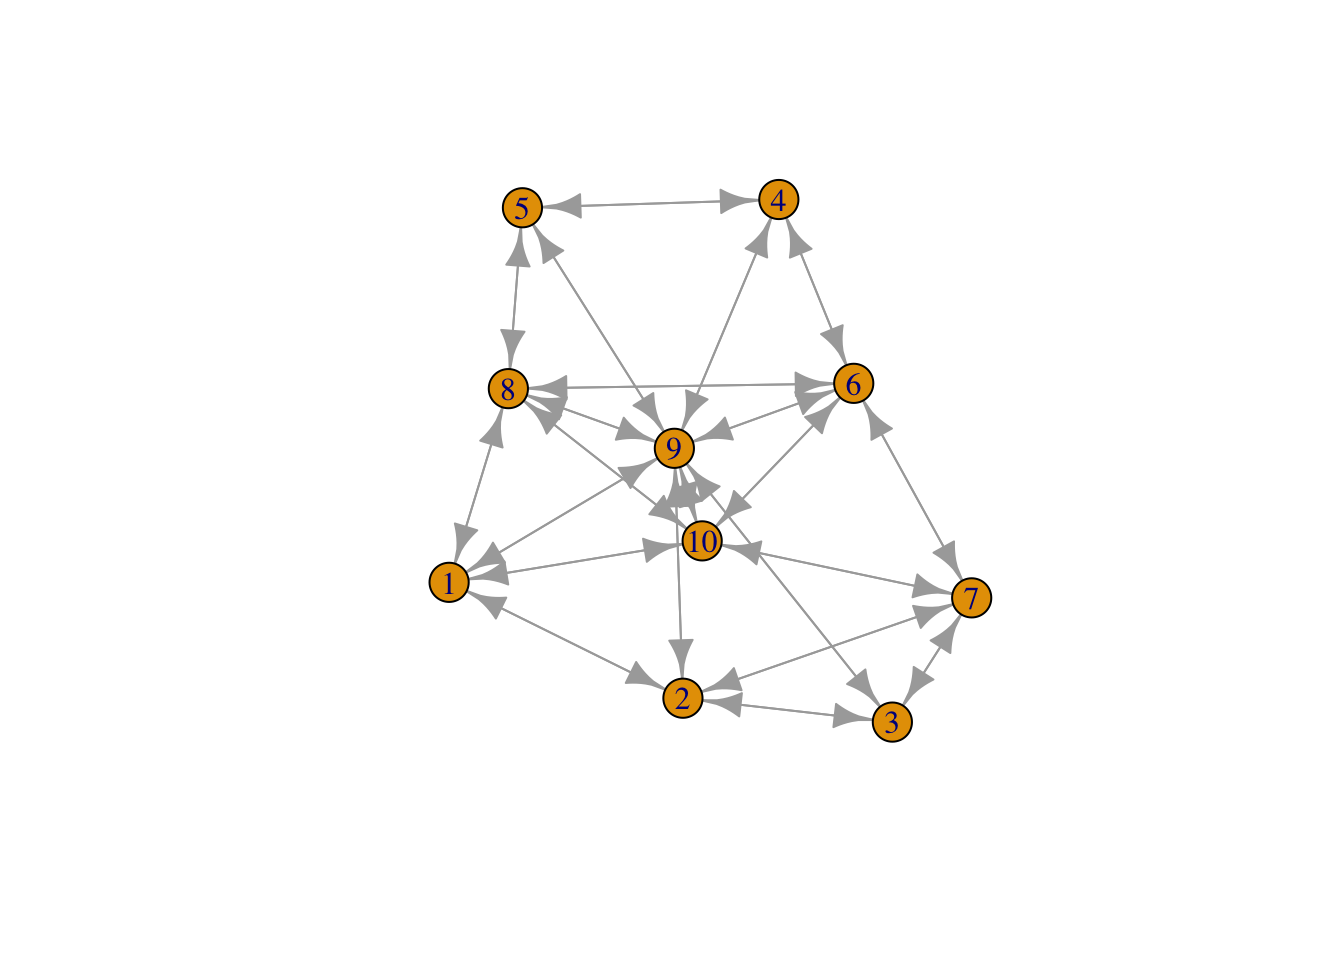 A simple network with 10 vertices, which are connected by edges (arrows).